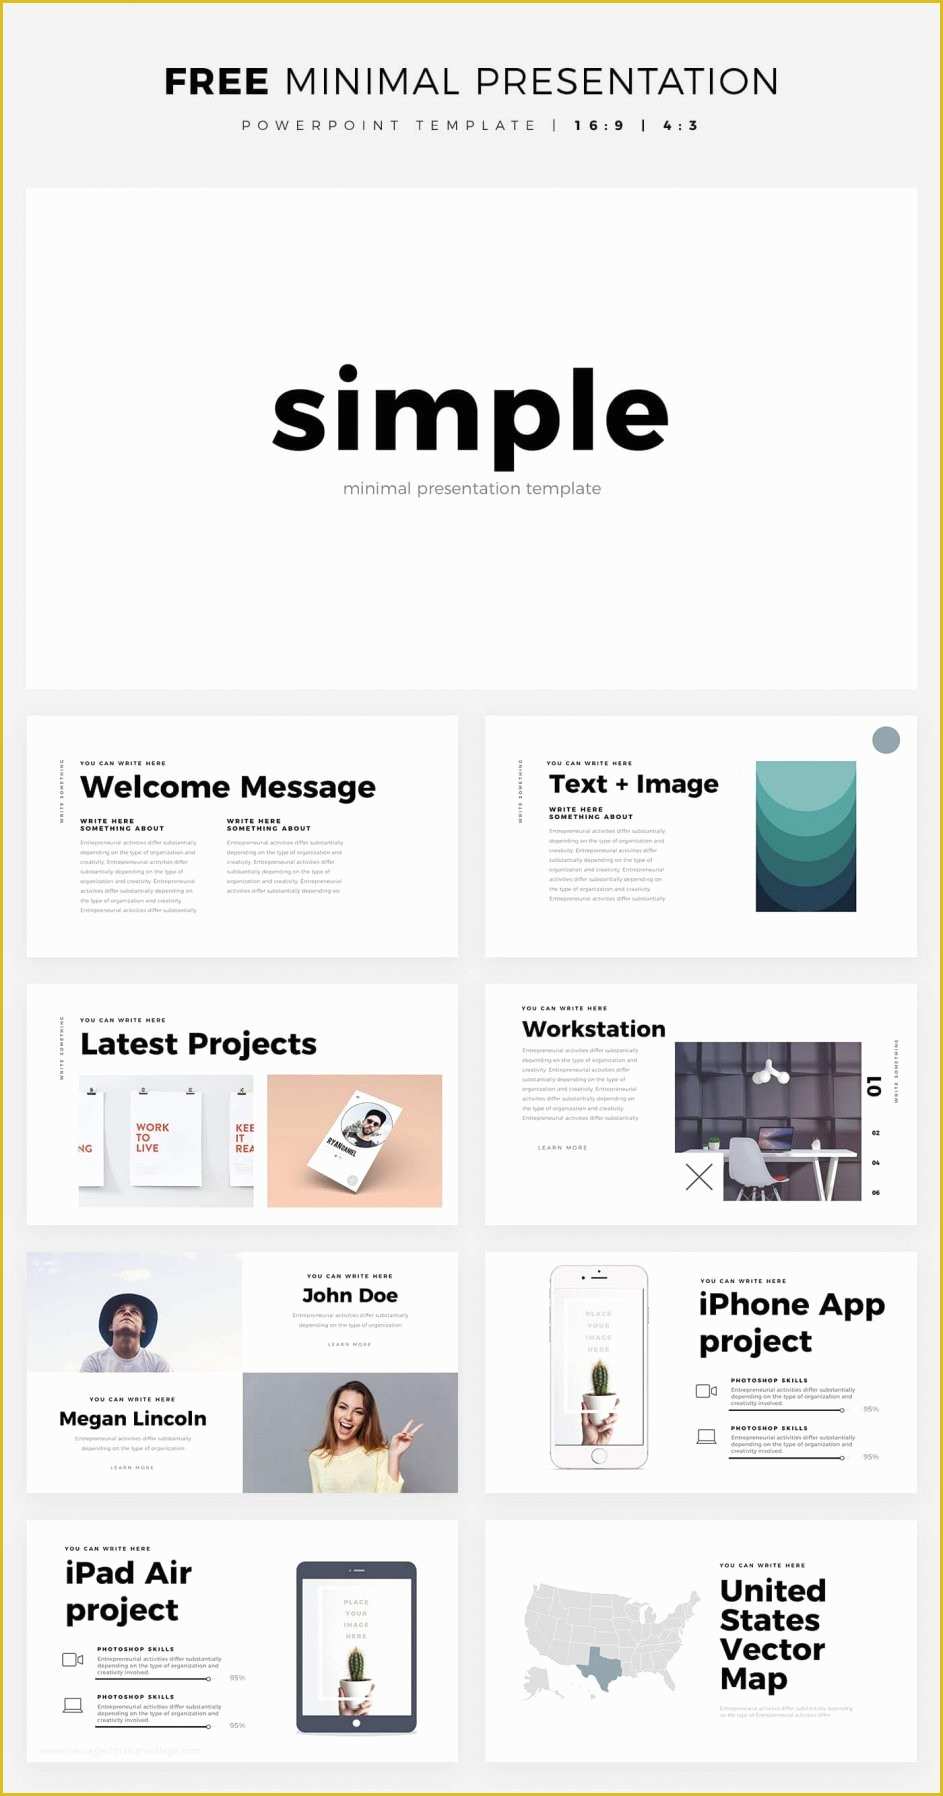 Free Minimal Keynote Template Of 40 Free Cool Powerpoint Templates for Presentations